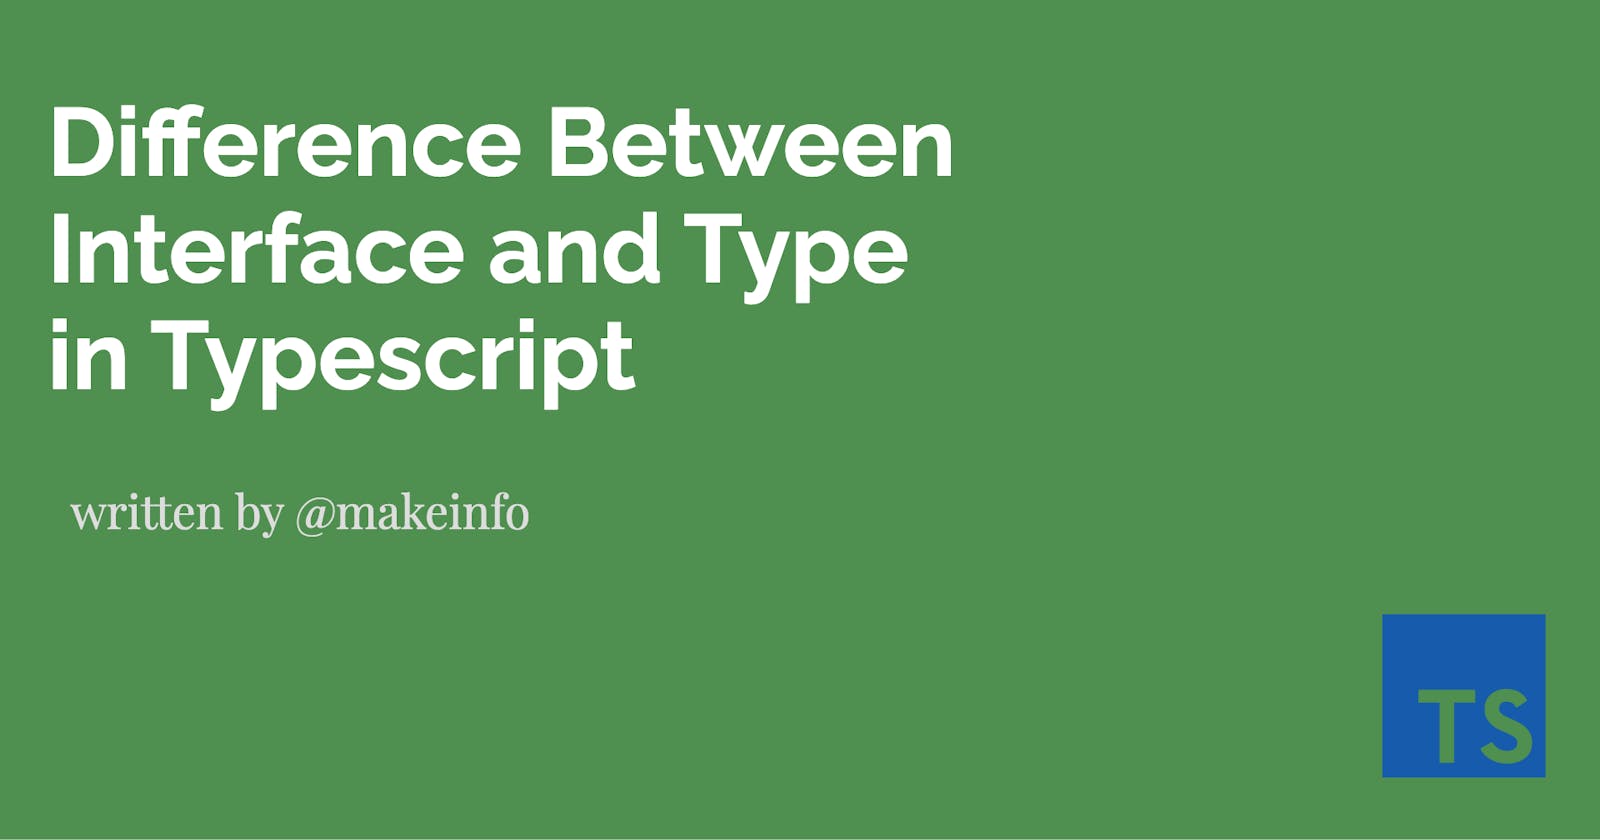 Difference Between Interface and Type in Typescript